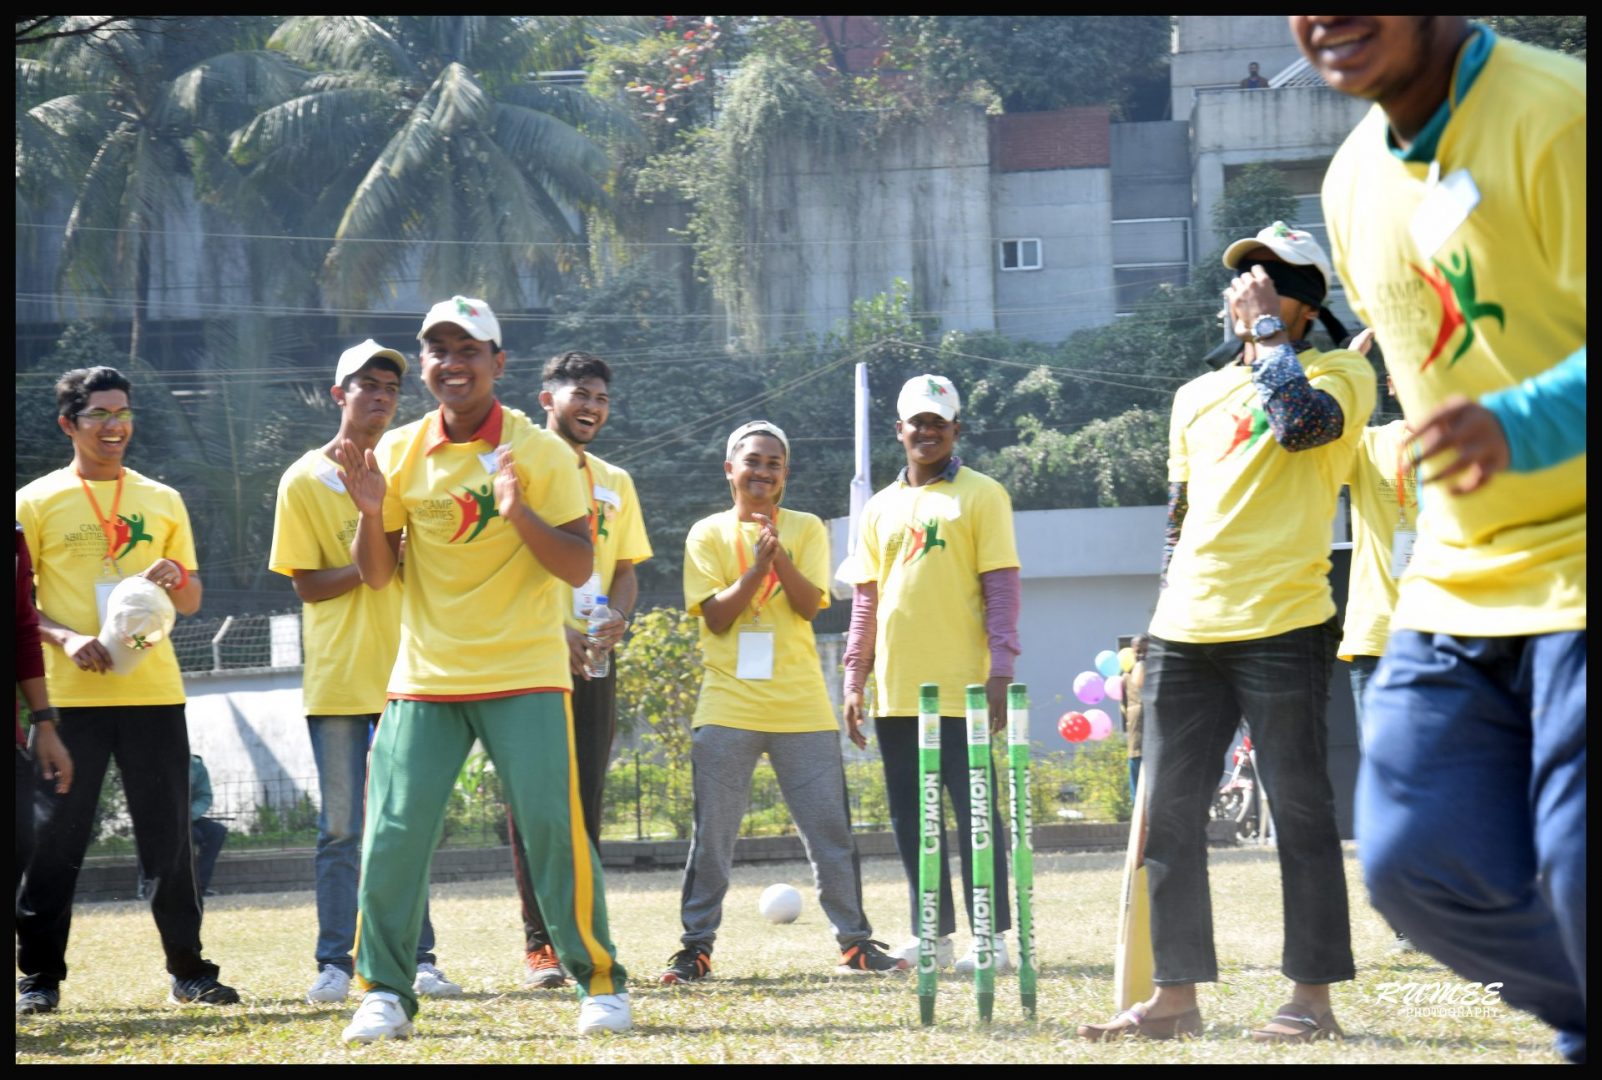 Group of Bangladesh athletes and coaches smiling, clapping, and cheering while playing cricket. Trees and houses in background. Standing in a field with green cricket wickets in ground.